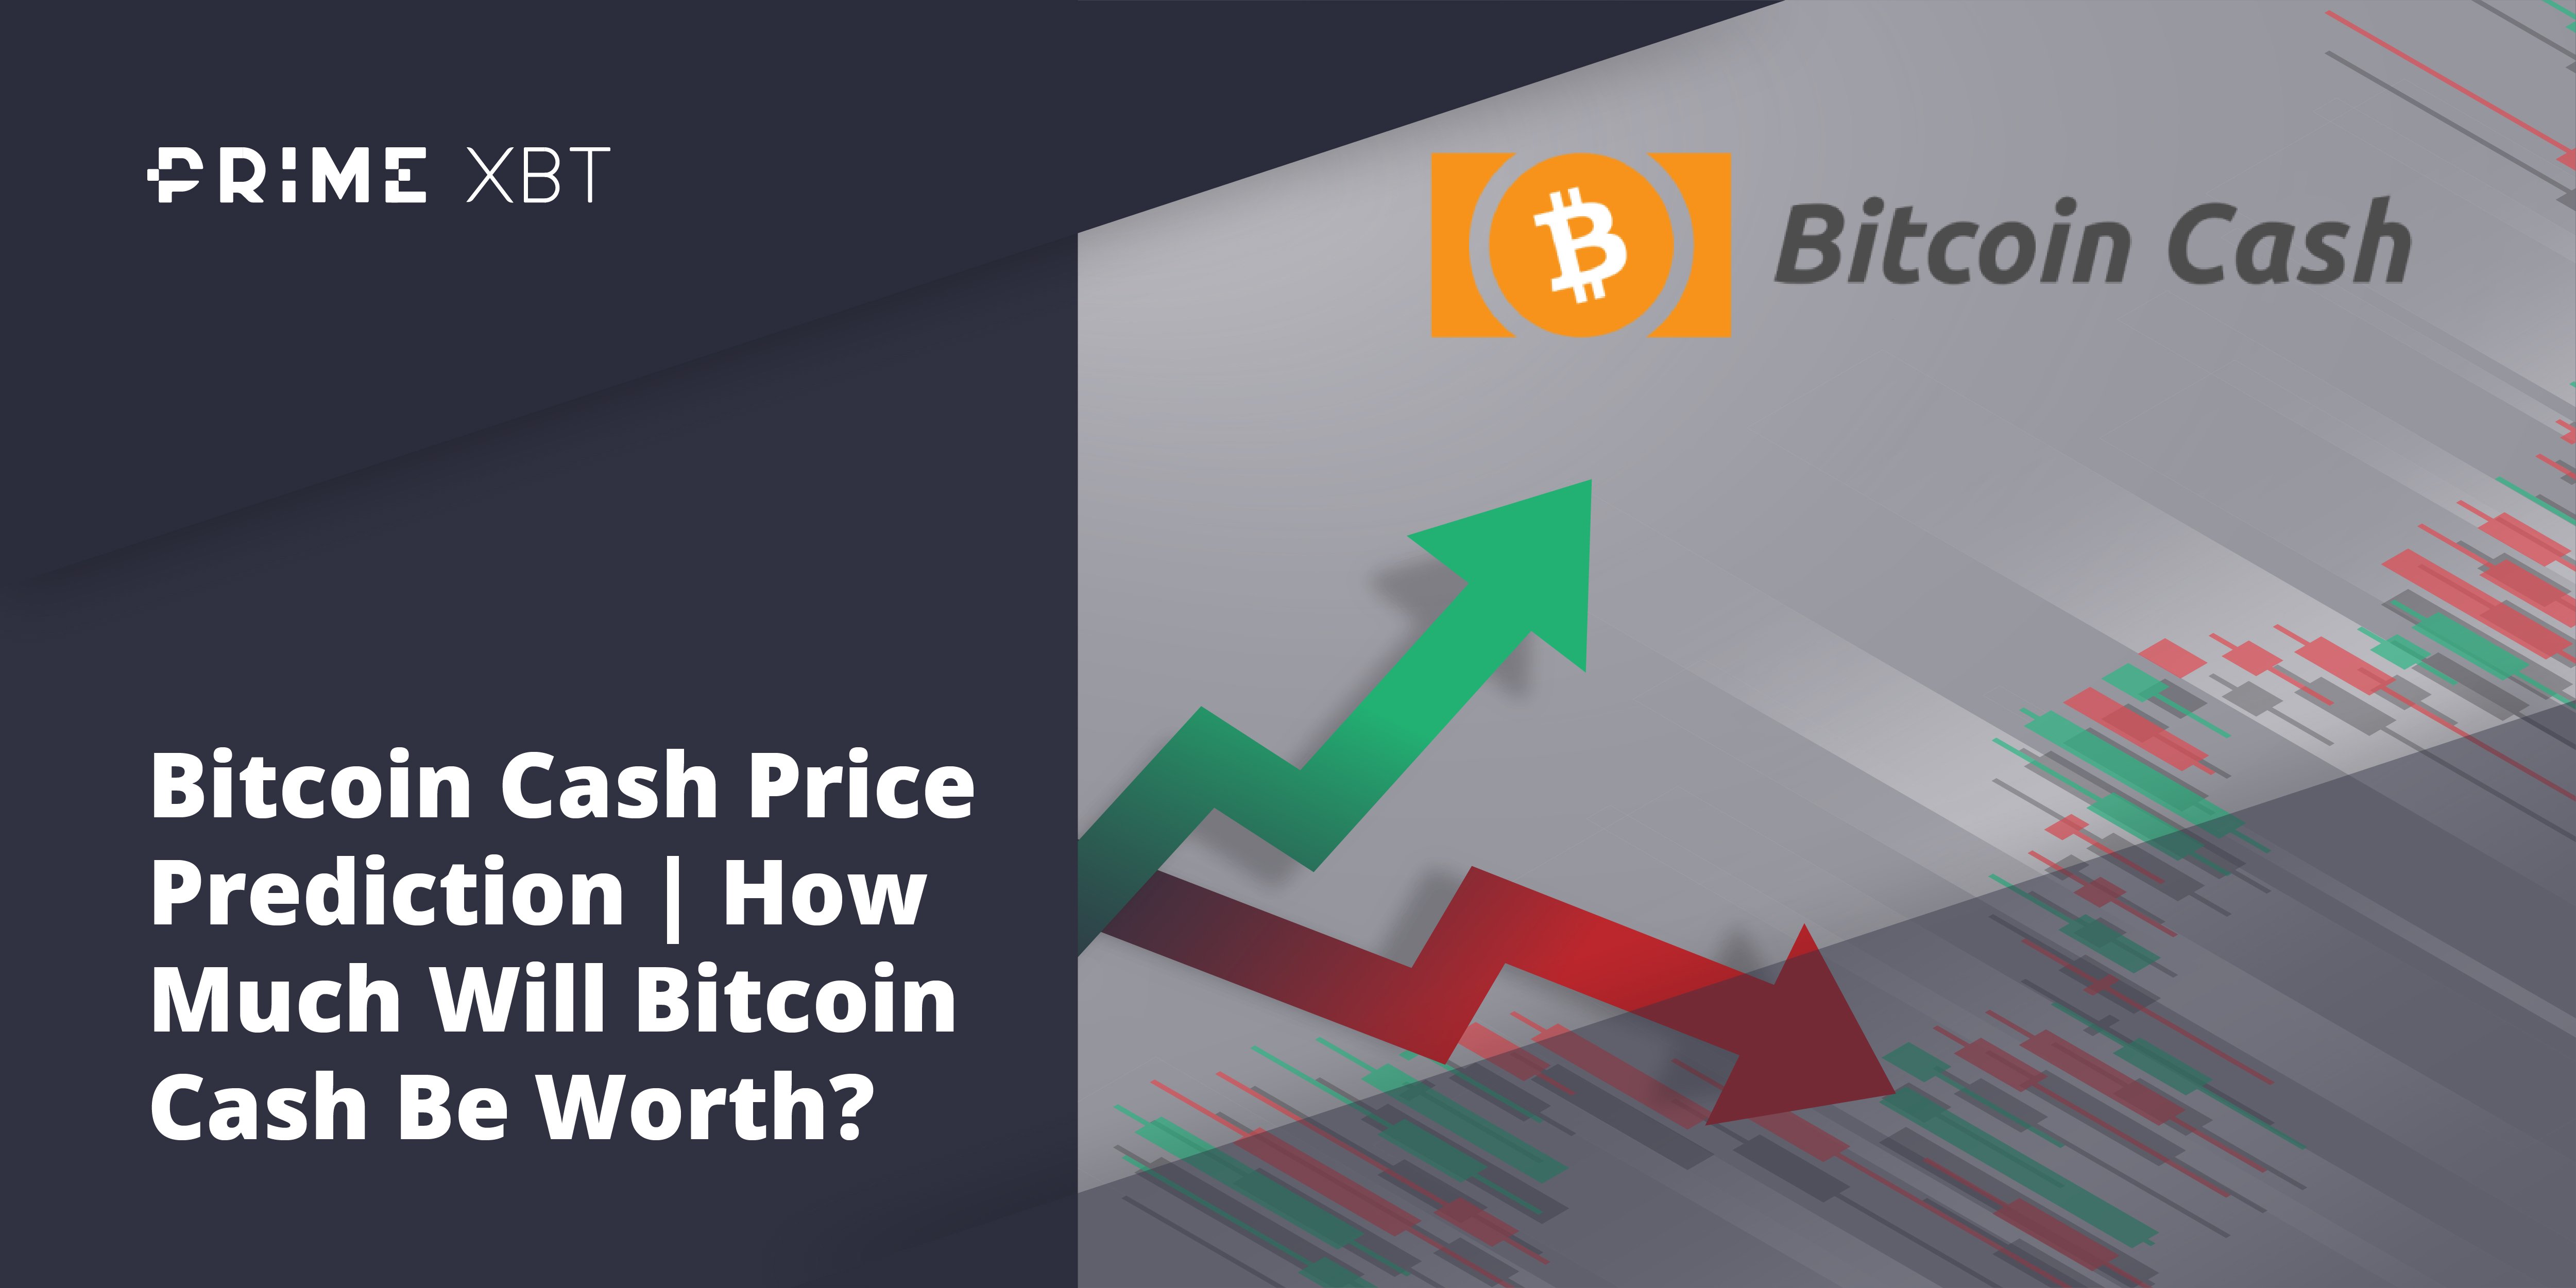 Predicting the Price of Bitcoin Cash for 2022, 2023, and 2025 - bitcoin cash